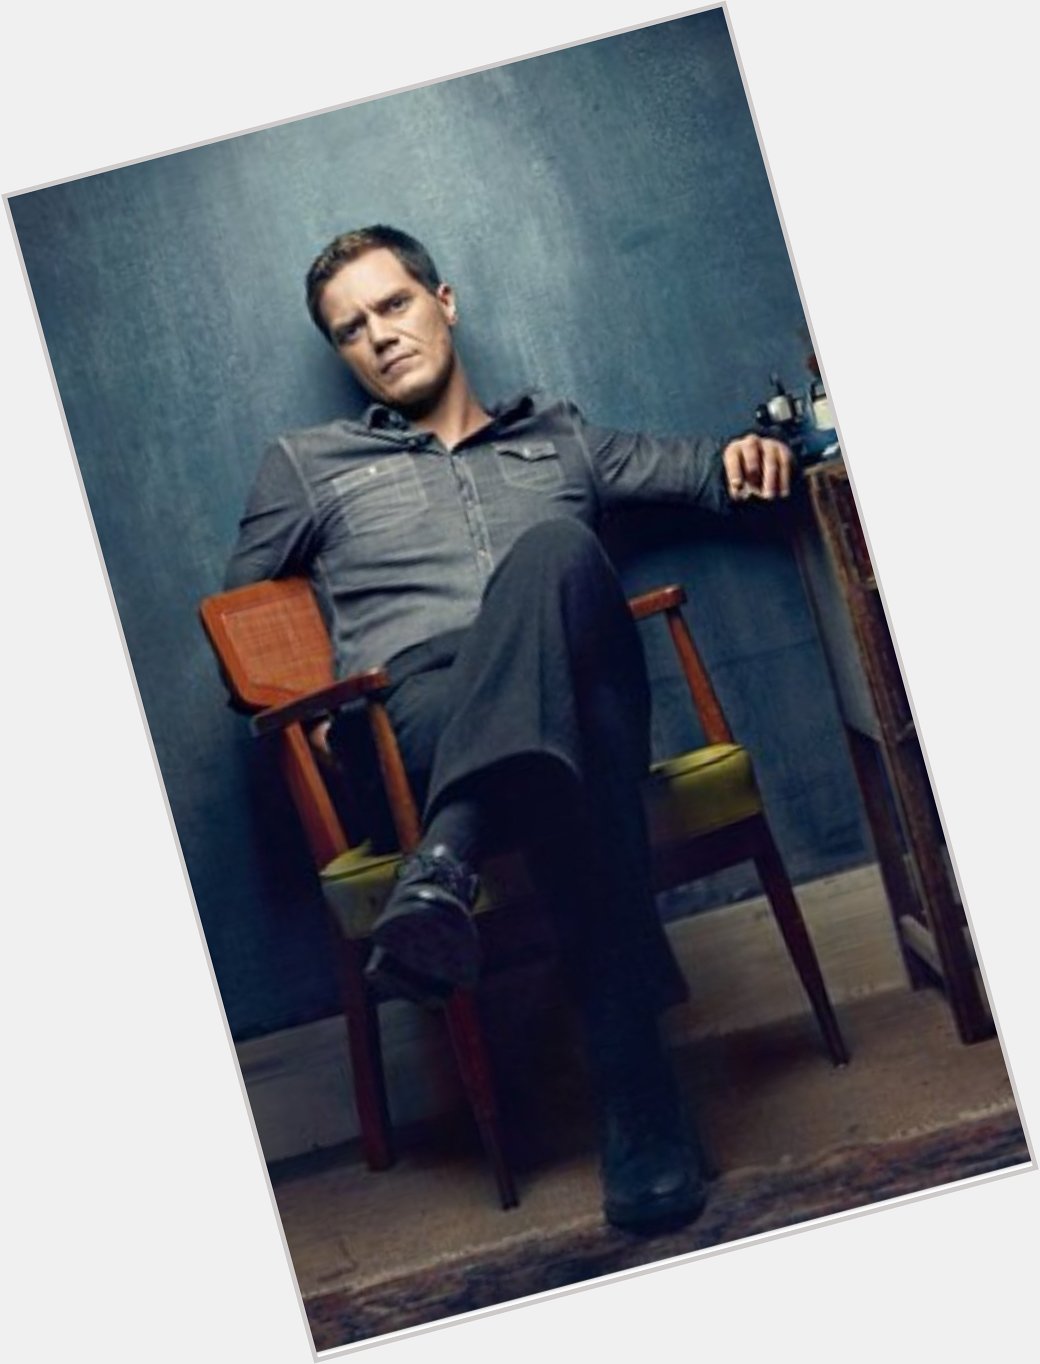 Happy Birthday Michael Shannon! One of my favourite actors, and the pinnacle of perfection! 